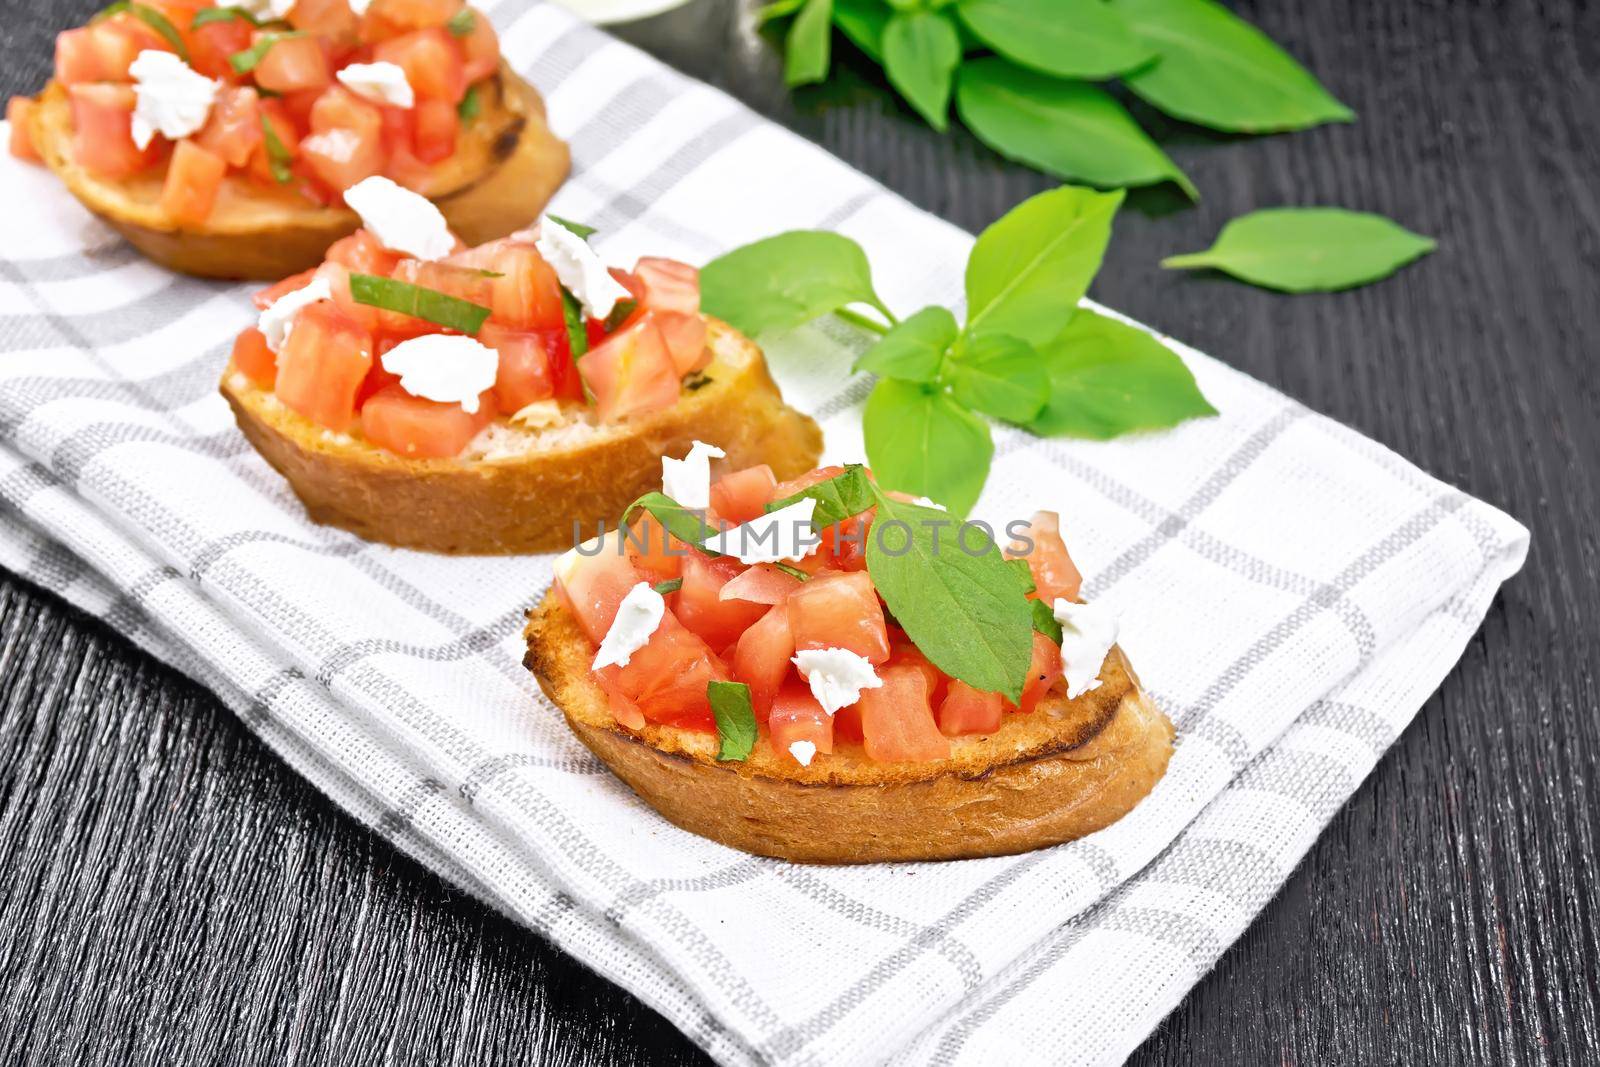 Bruschetta with tomato, basil and soft cheese on a towel on dark wooden board